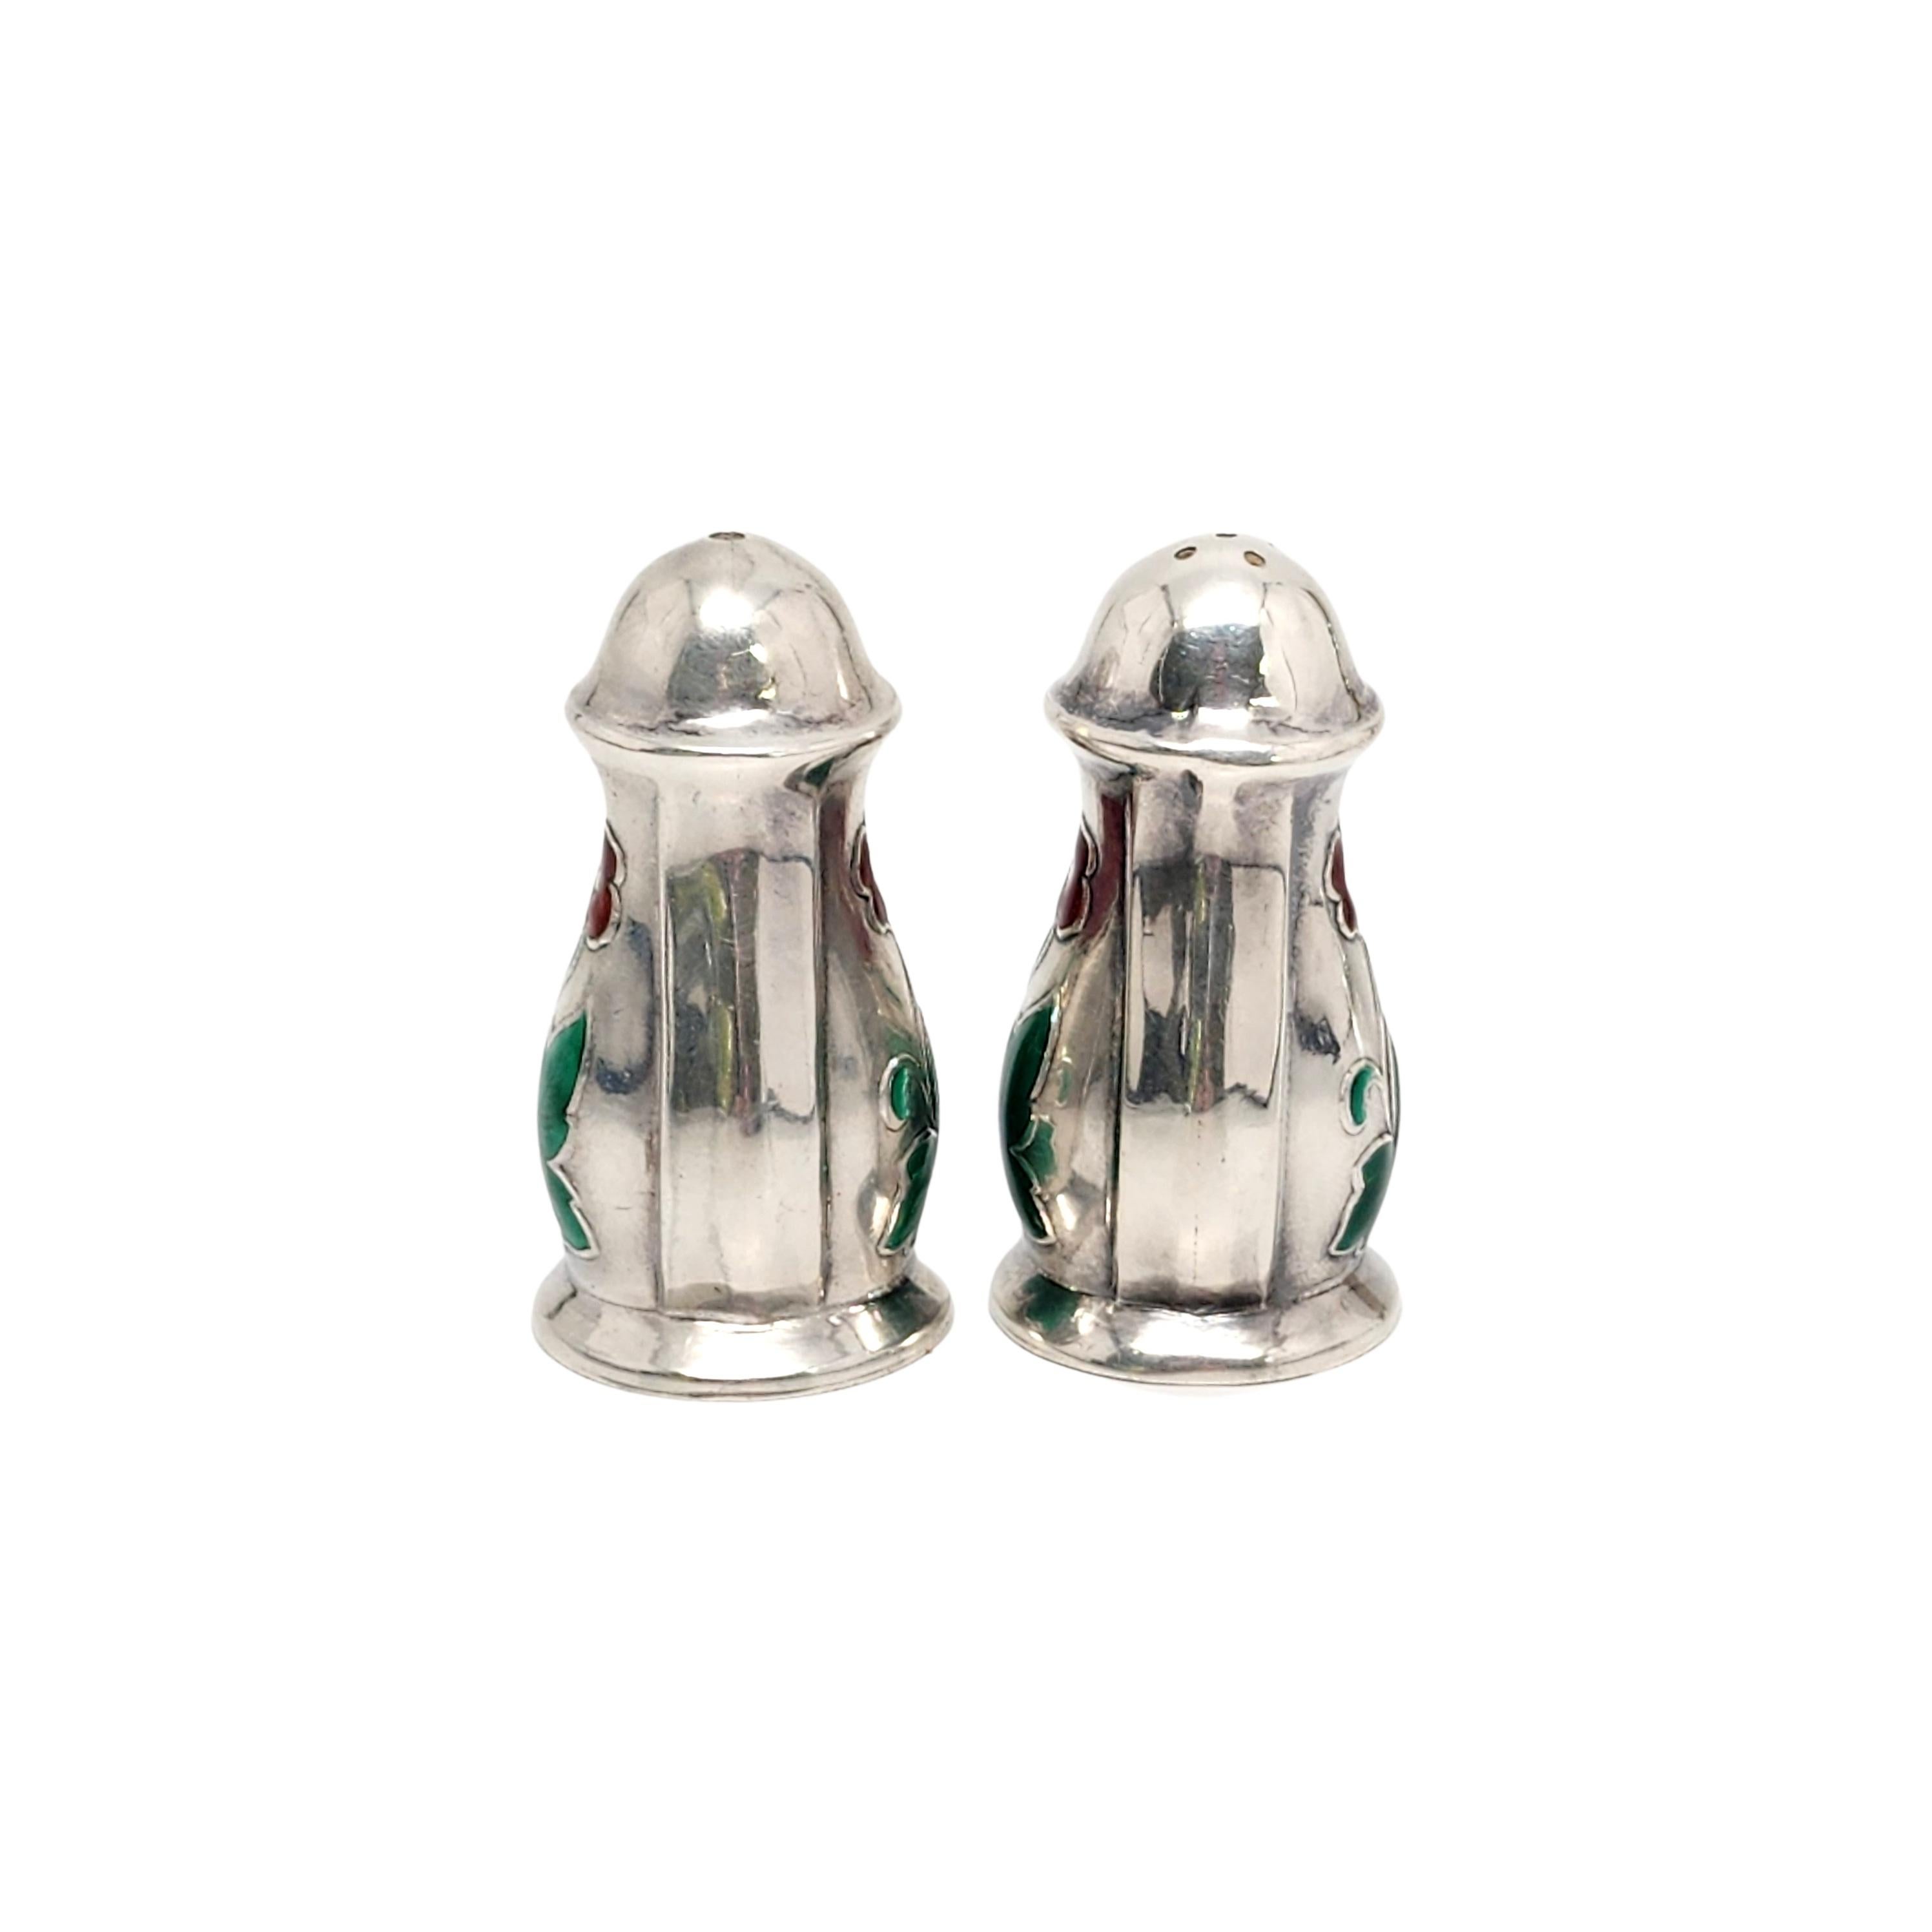 Sterling silver and enamel flower salt and pepper shakers by Meka of Denmark.

Small sterling silver salt and pepper shakers featuring enamel flowers. Salt shaker features 5 holes, pepper shaker features 1 hole. Bottom lids unscrew to